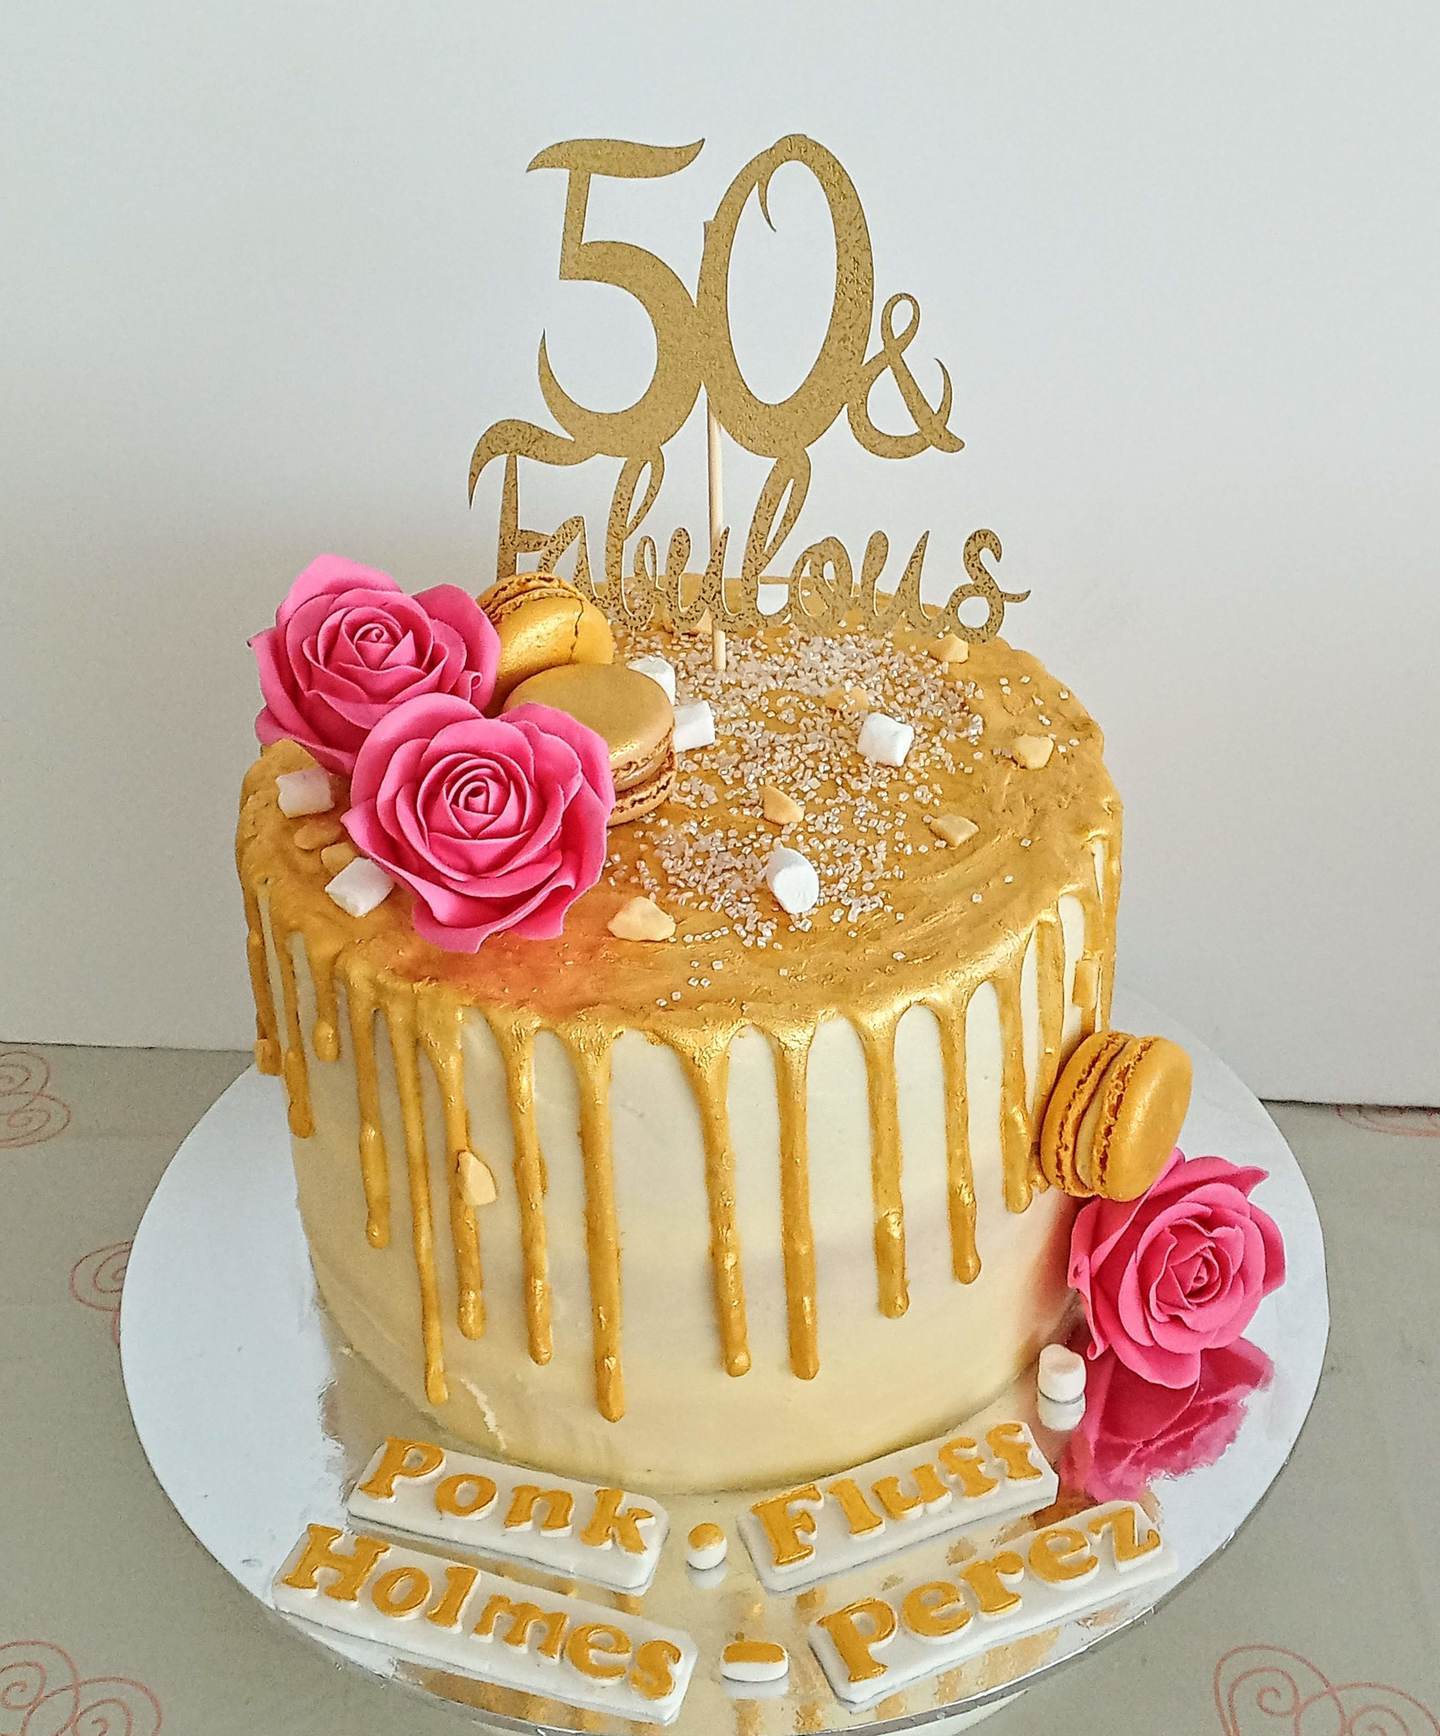 Ladies 50th gold drip cake with pink sugar roses